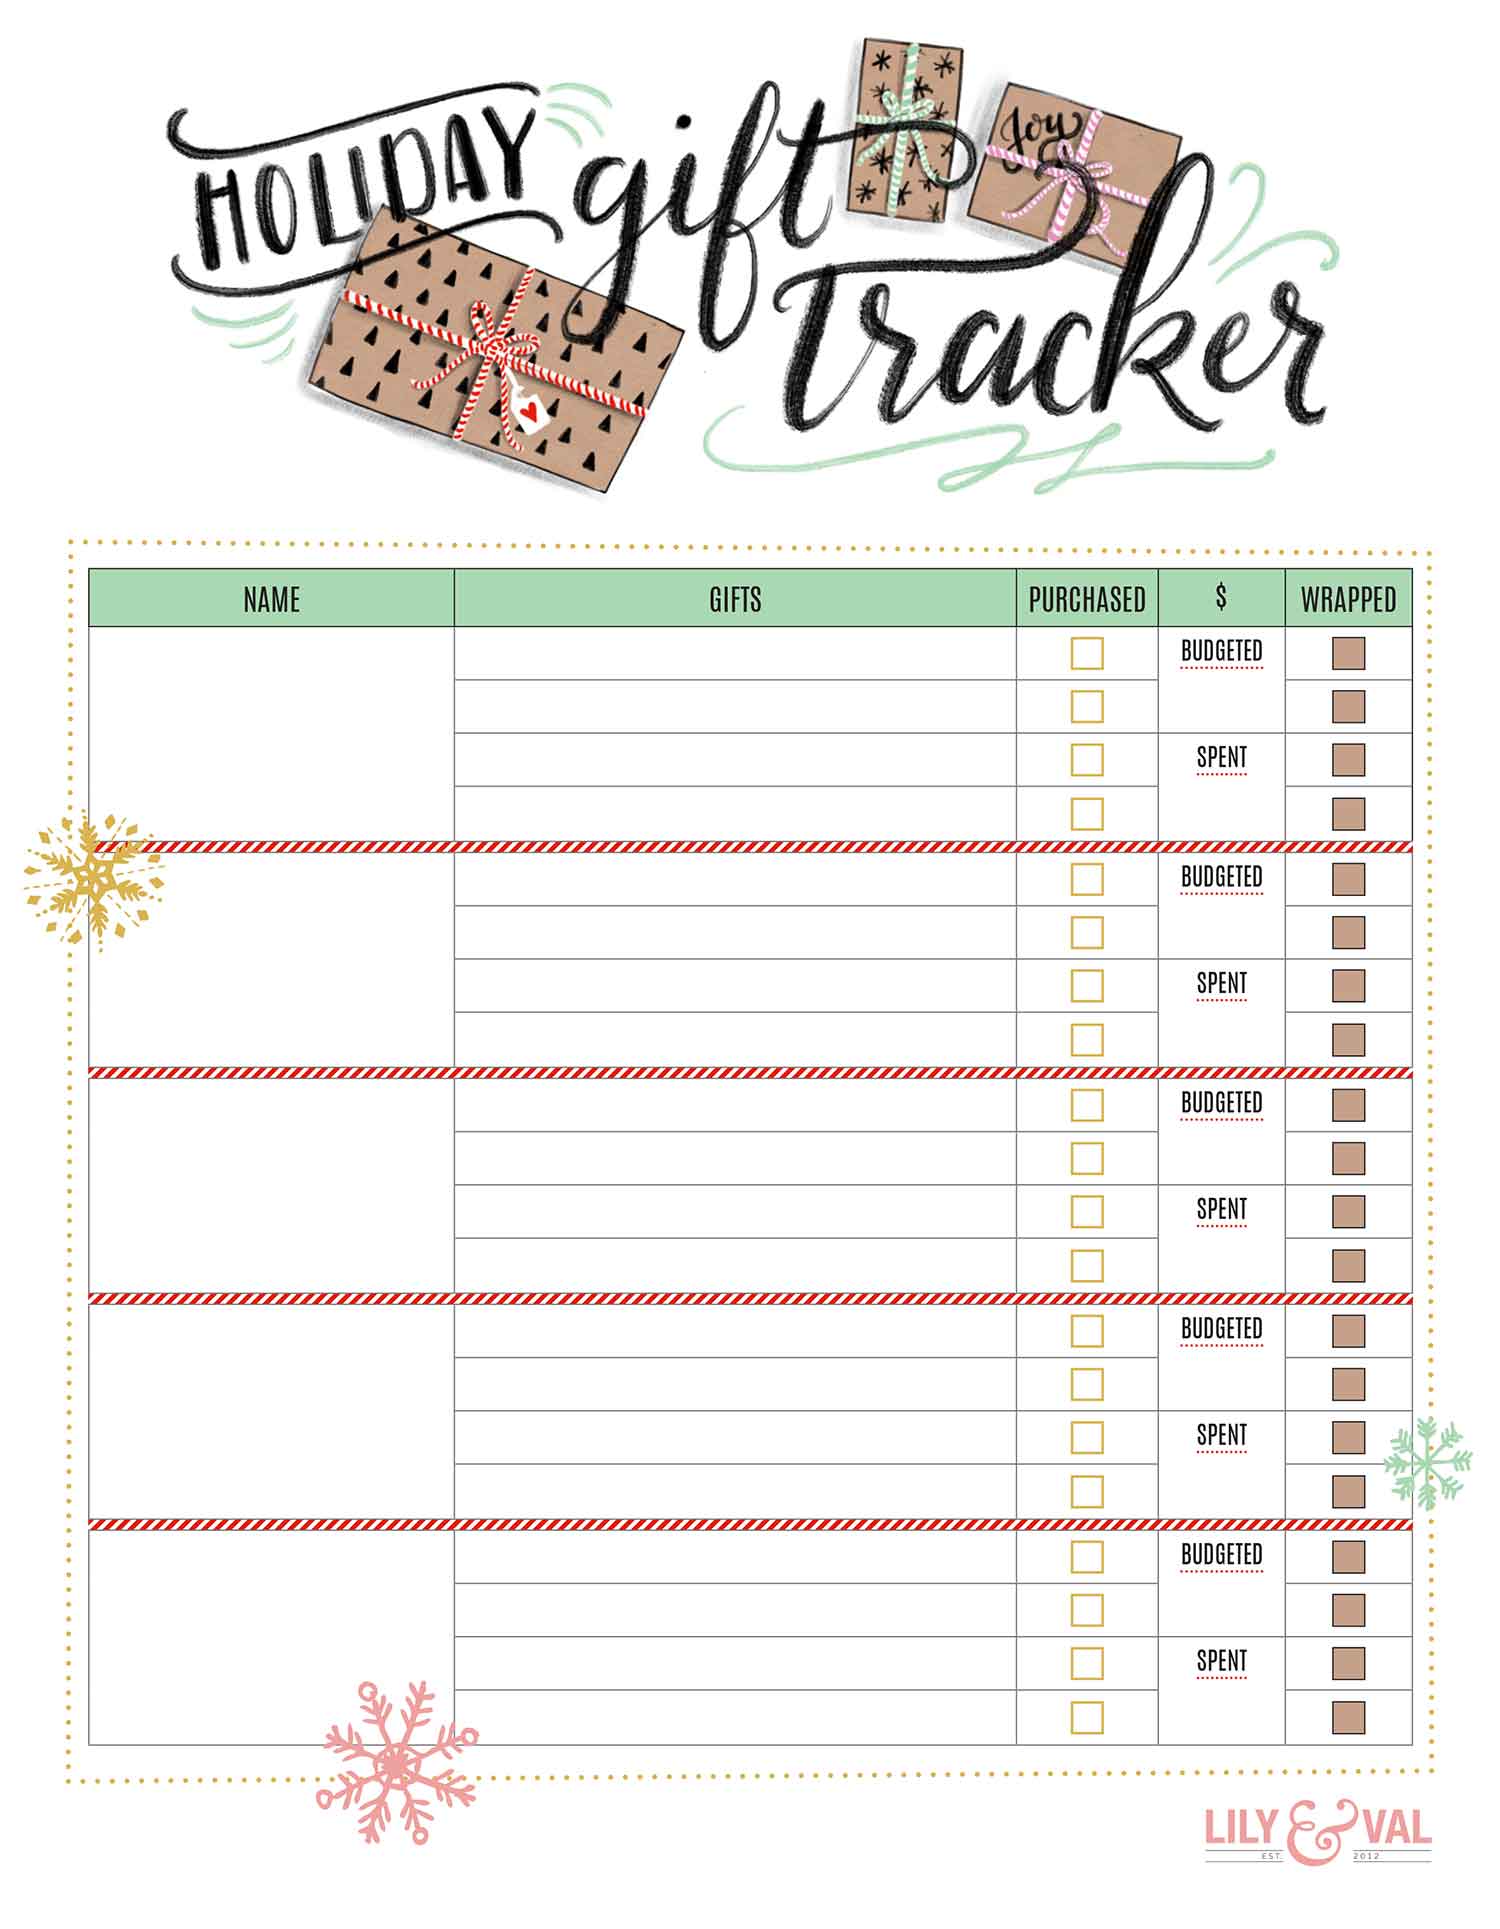 Organize your Christmas gifting this year with a FREE holiday gift tracker download